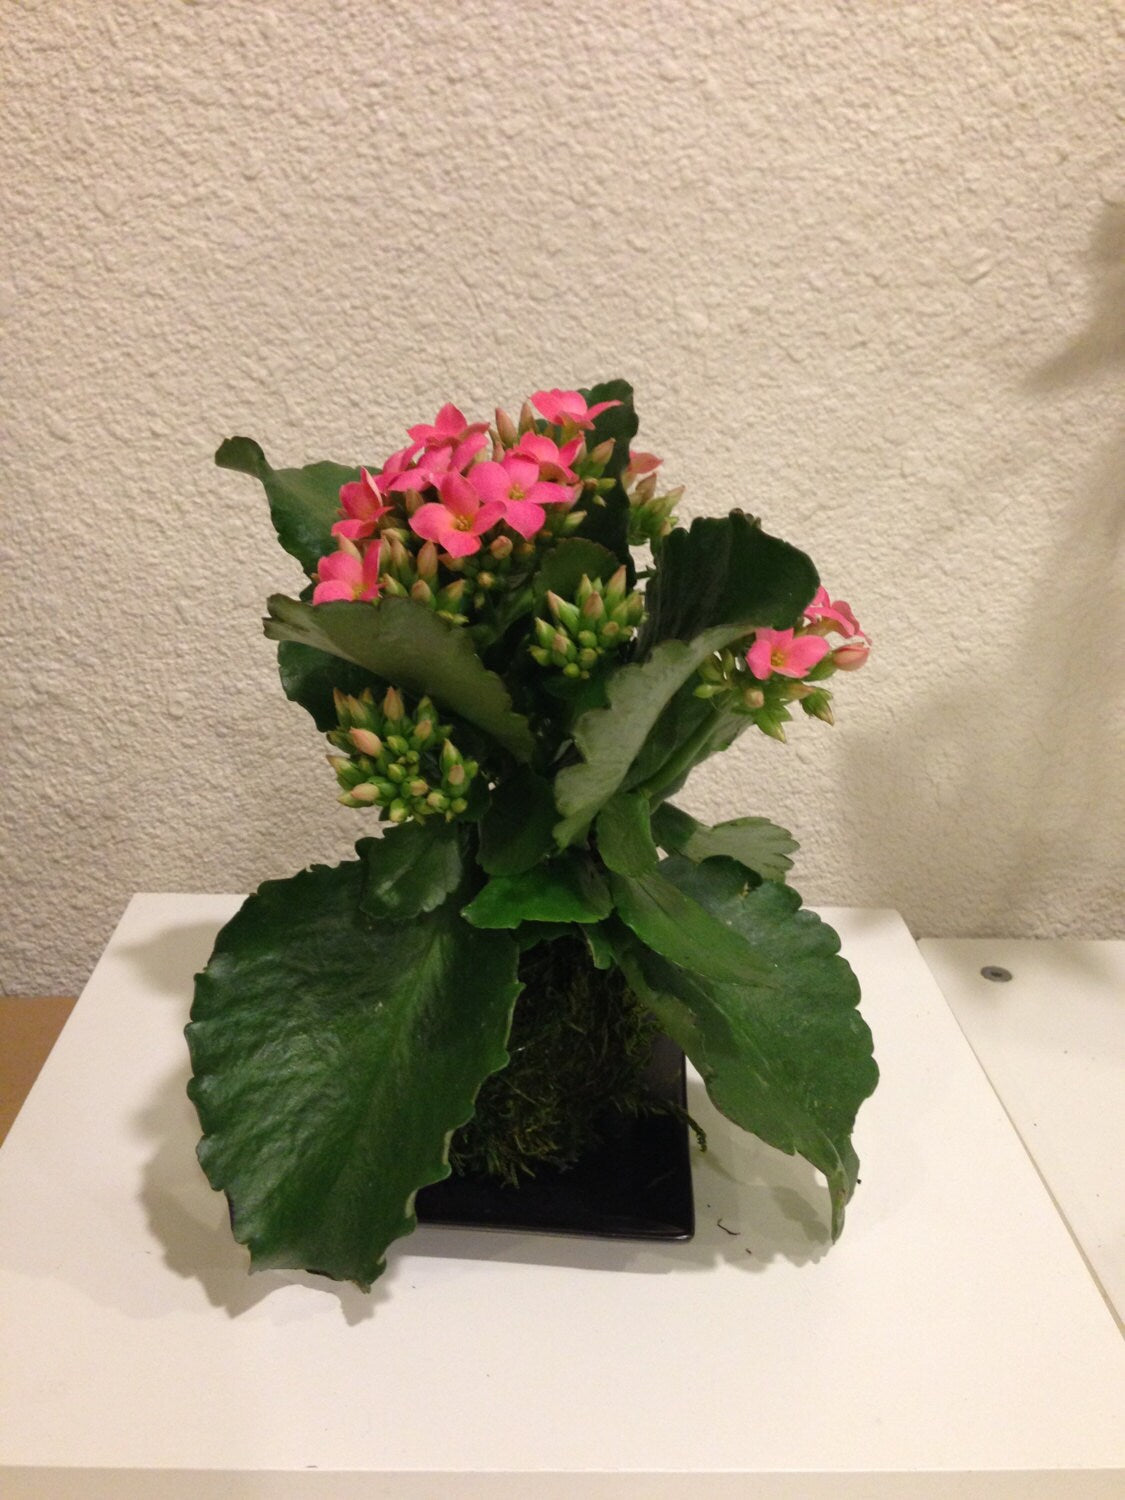 Medium size Kalanchoe Kokedama - Moss ball with blooming flower with many new buds!